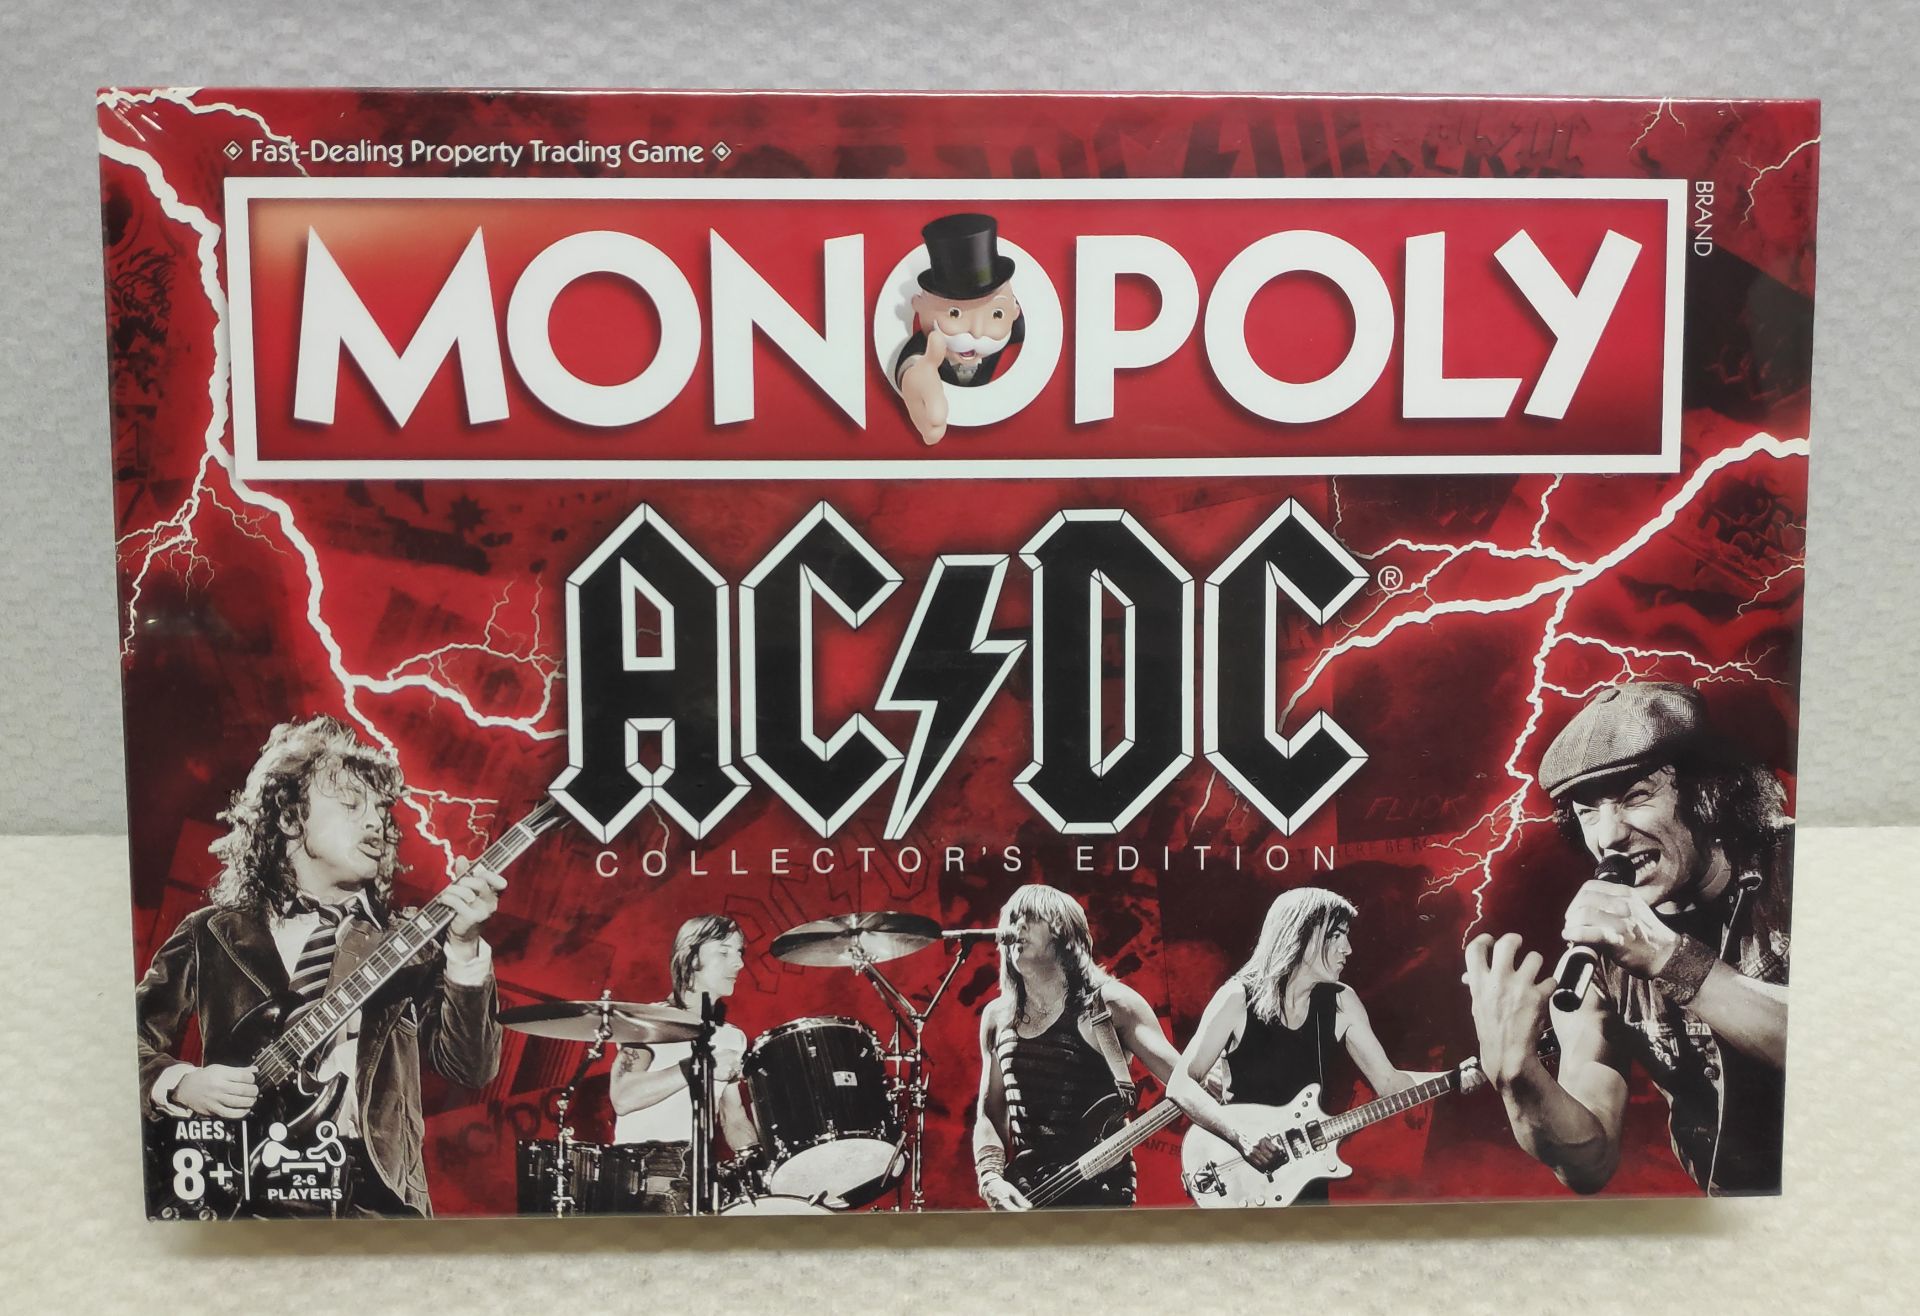 1 x AC/DC Collector's Edition Monopoly - New/Sealed - CL720 - Location: Altrincham WA14<BR